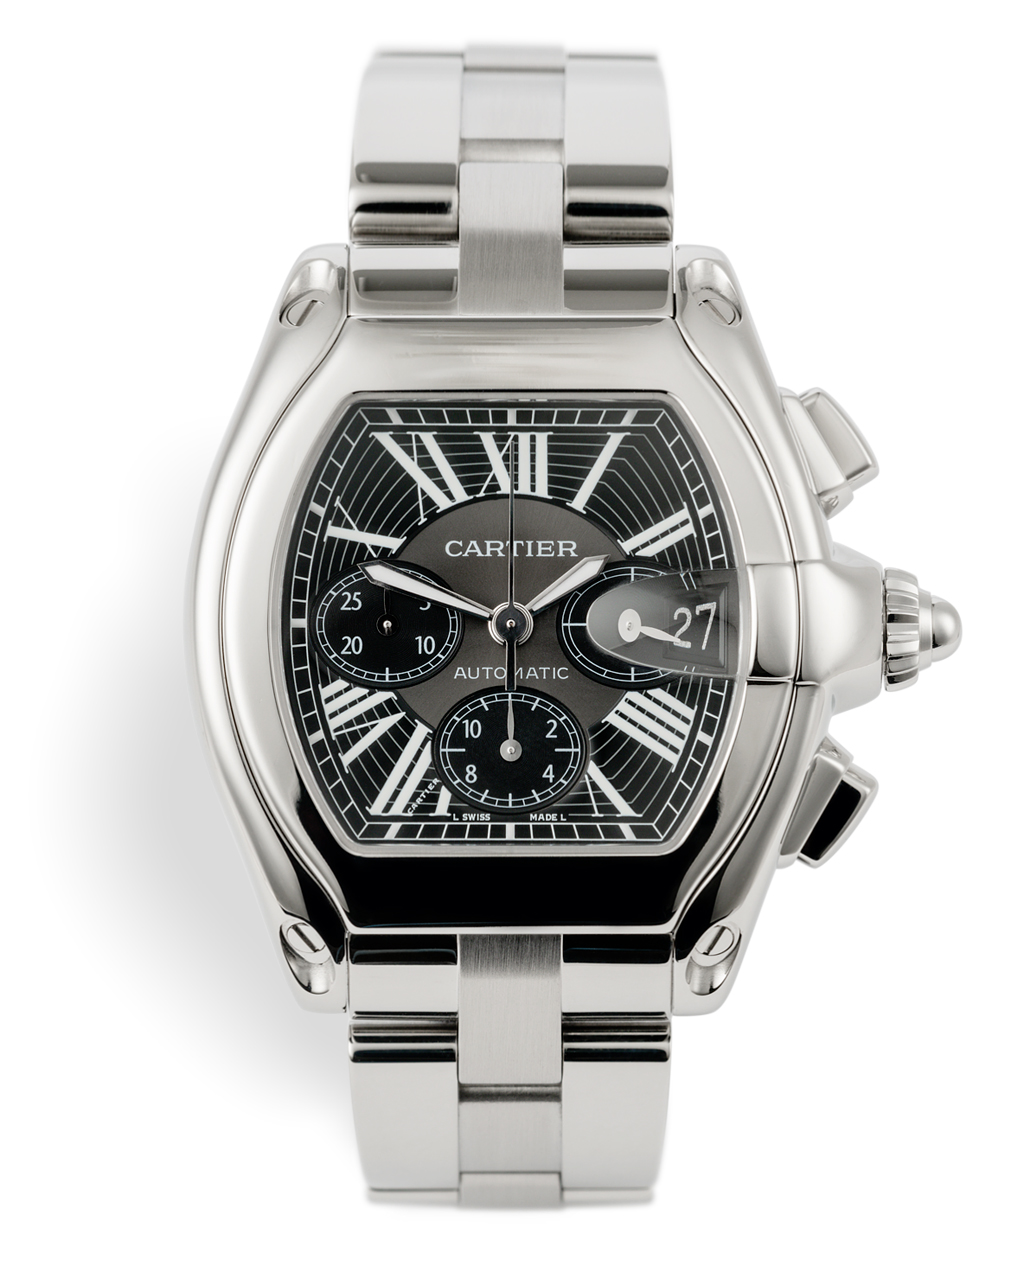 Cartier Roadster XL Chronograph Watches | ref 2618 | Box & Papers | The ...